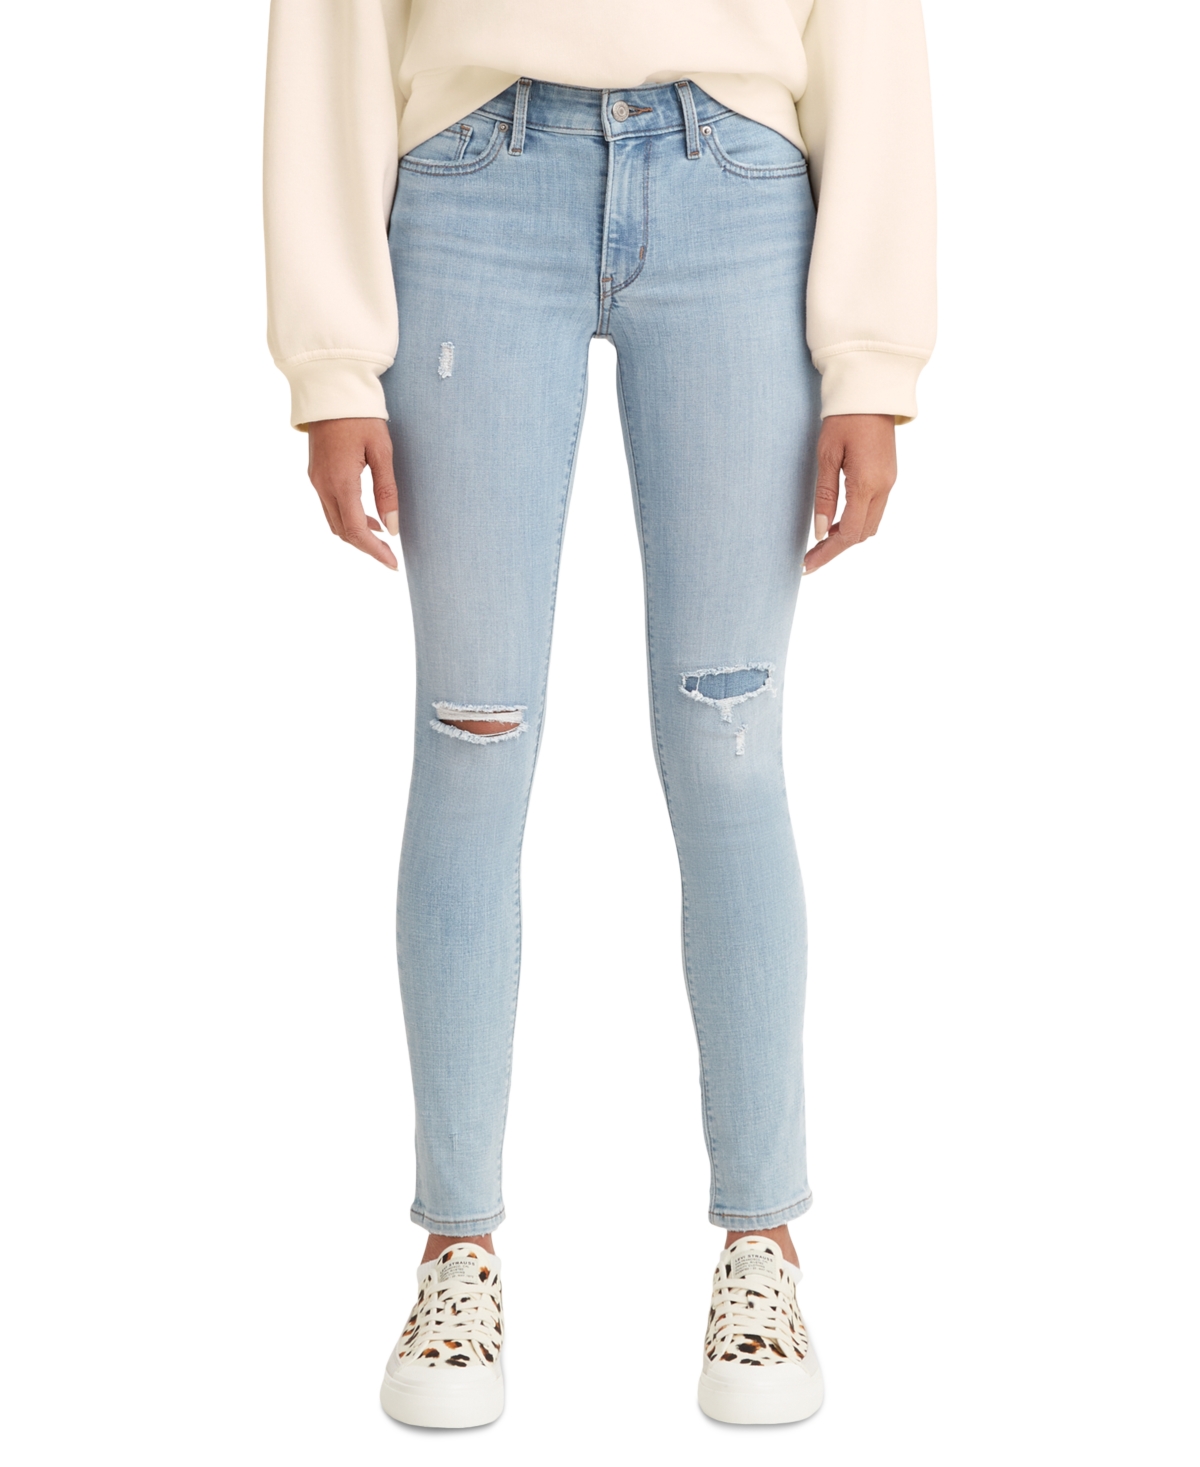 LEVI'S WOMEN'S 711 MID RISE STRETCH SKINNY JEANS